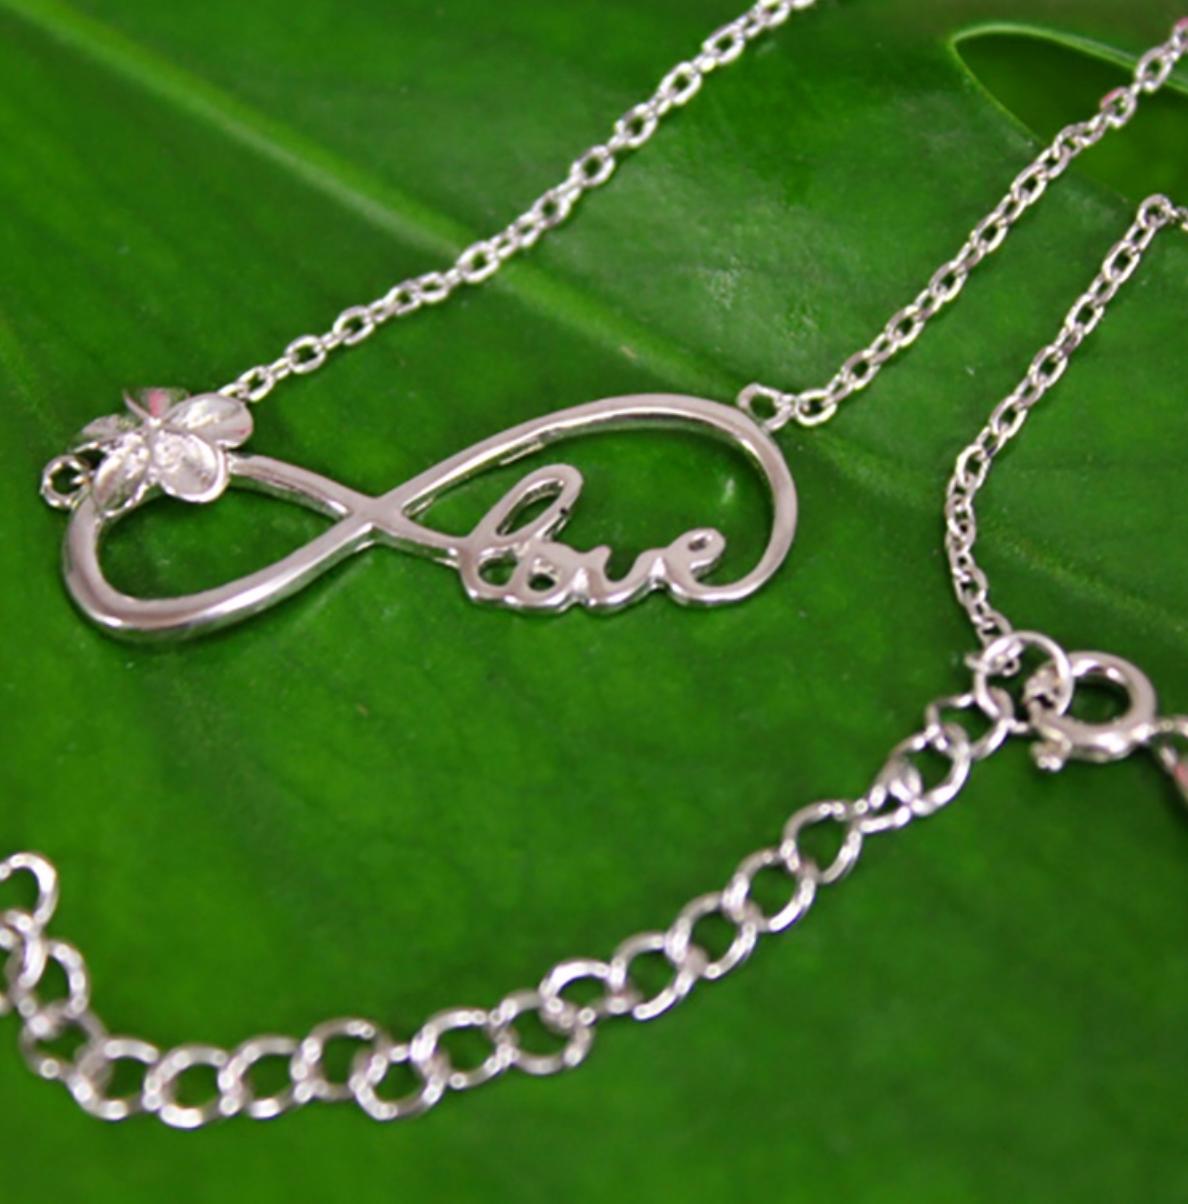 Plumeria Infinity Love Pendant Closeup with chain extension